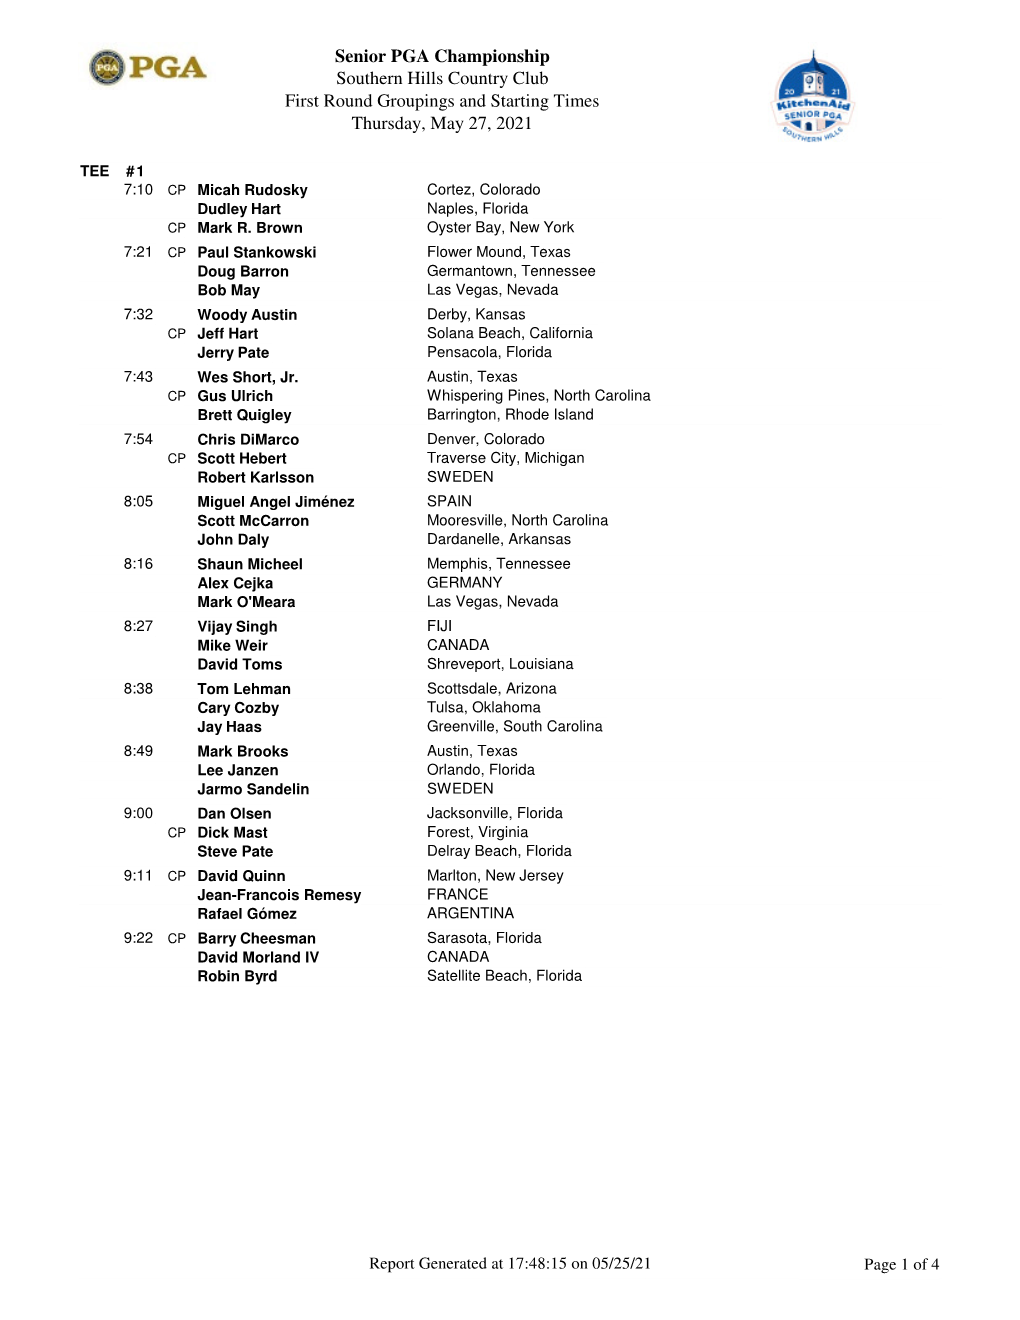 Senior PGA Championship Southern Hills Country Club First Round Groupings and Starting Times Thursday, May 27, 2021